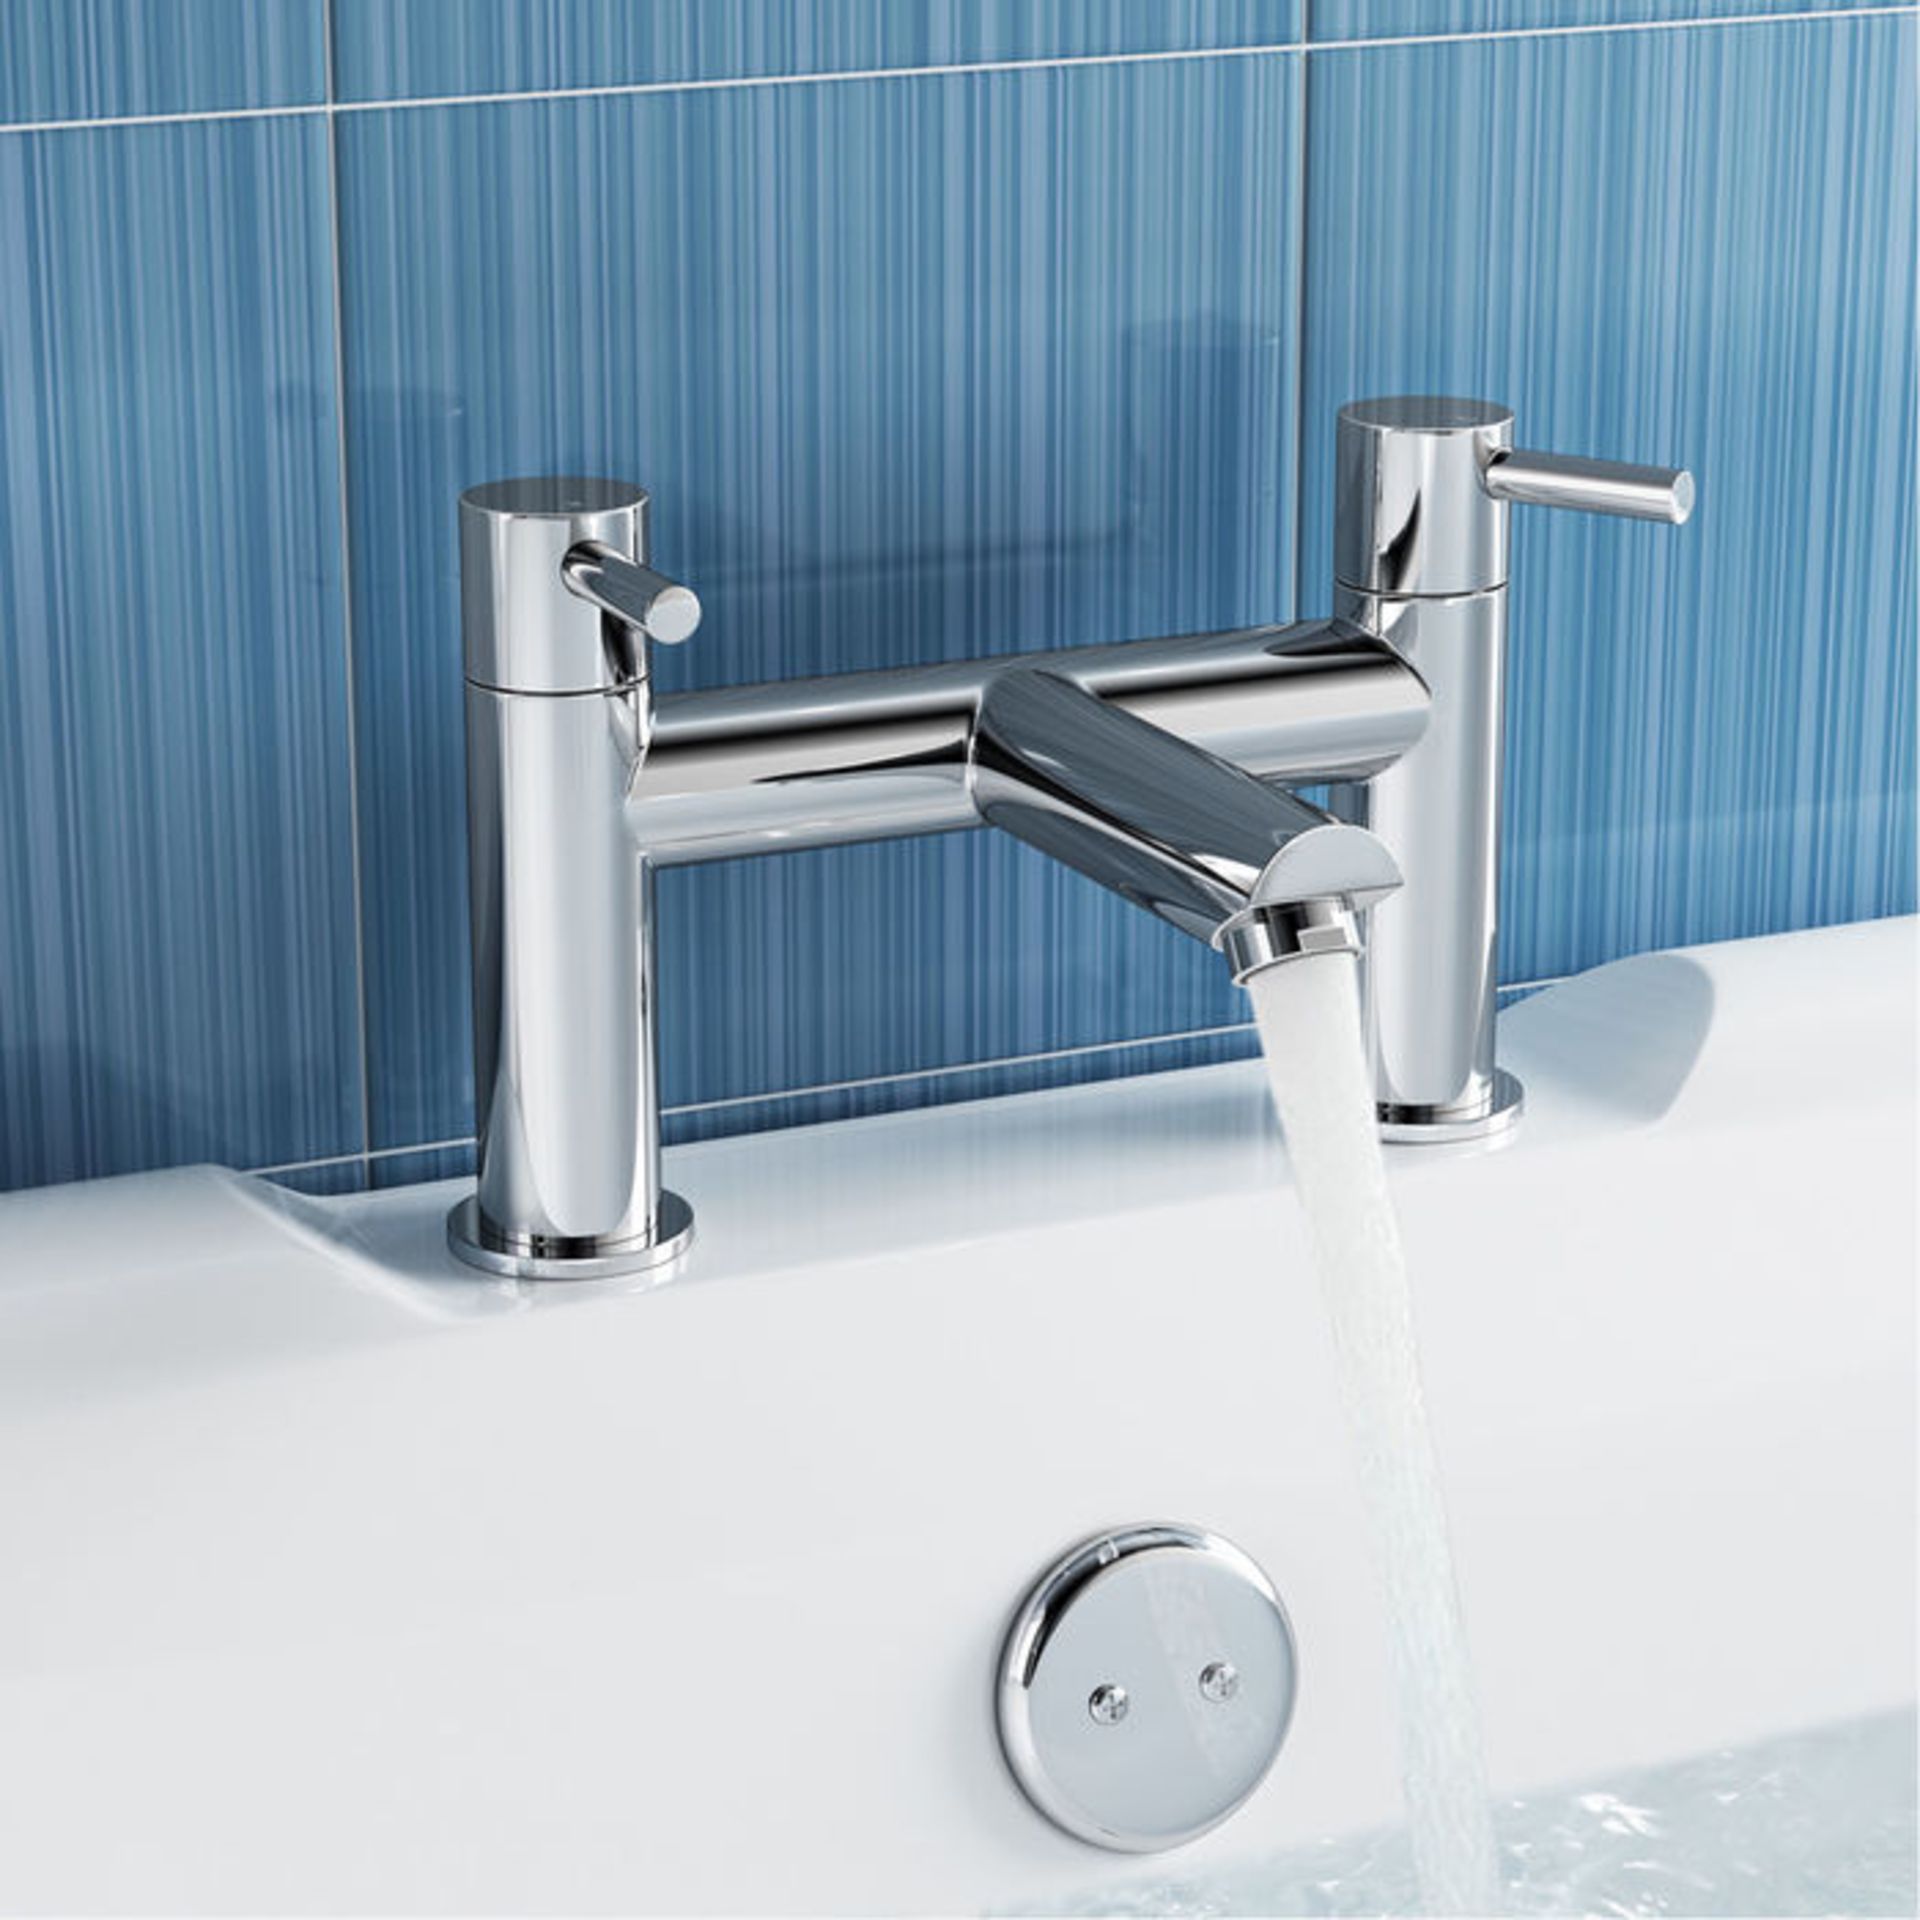 (AA65) Gladstone II Bath Filler Mixer Tap Chrome Plated Solid Brass 1/4 turn solid brass valve